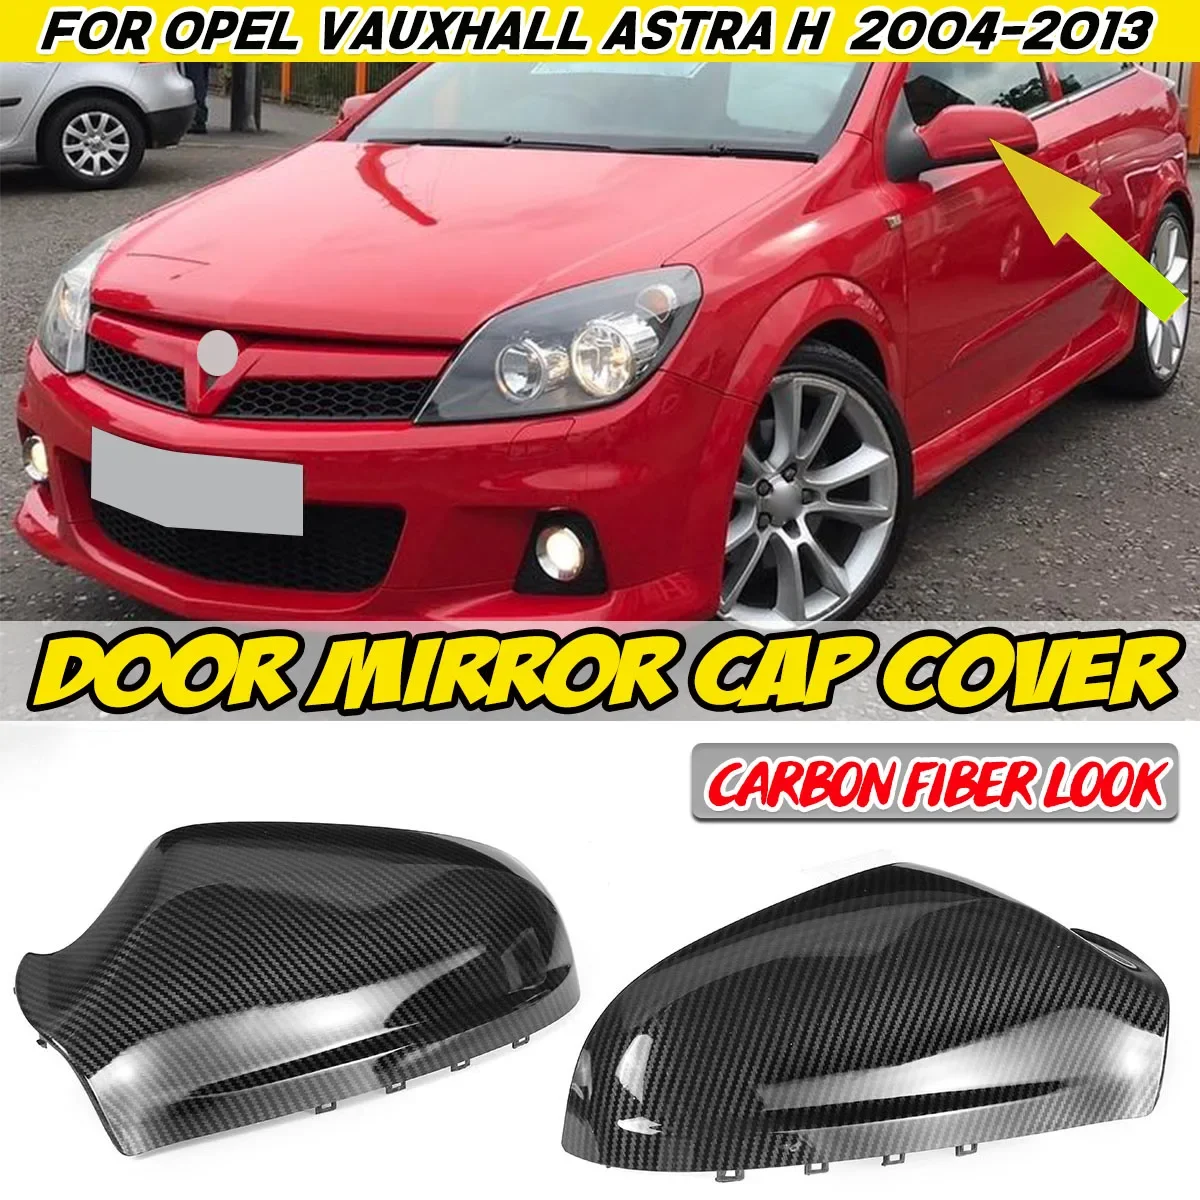 For Opel For Vauxhall For Astra H 2004-2013 Carbon Fiber Look Car Side Door Wing Rear View Mirror Cover Rearview Mirror Cover 1